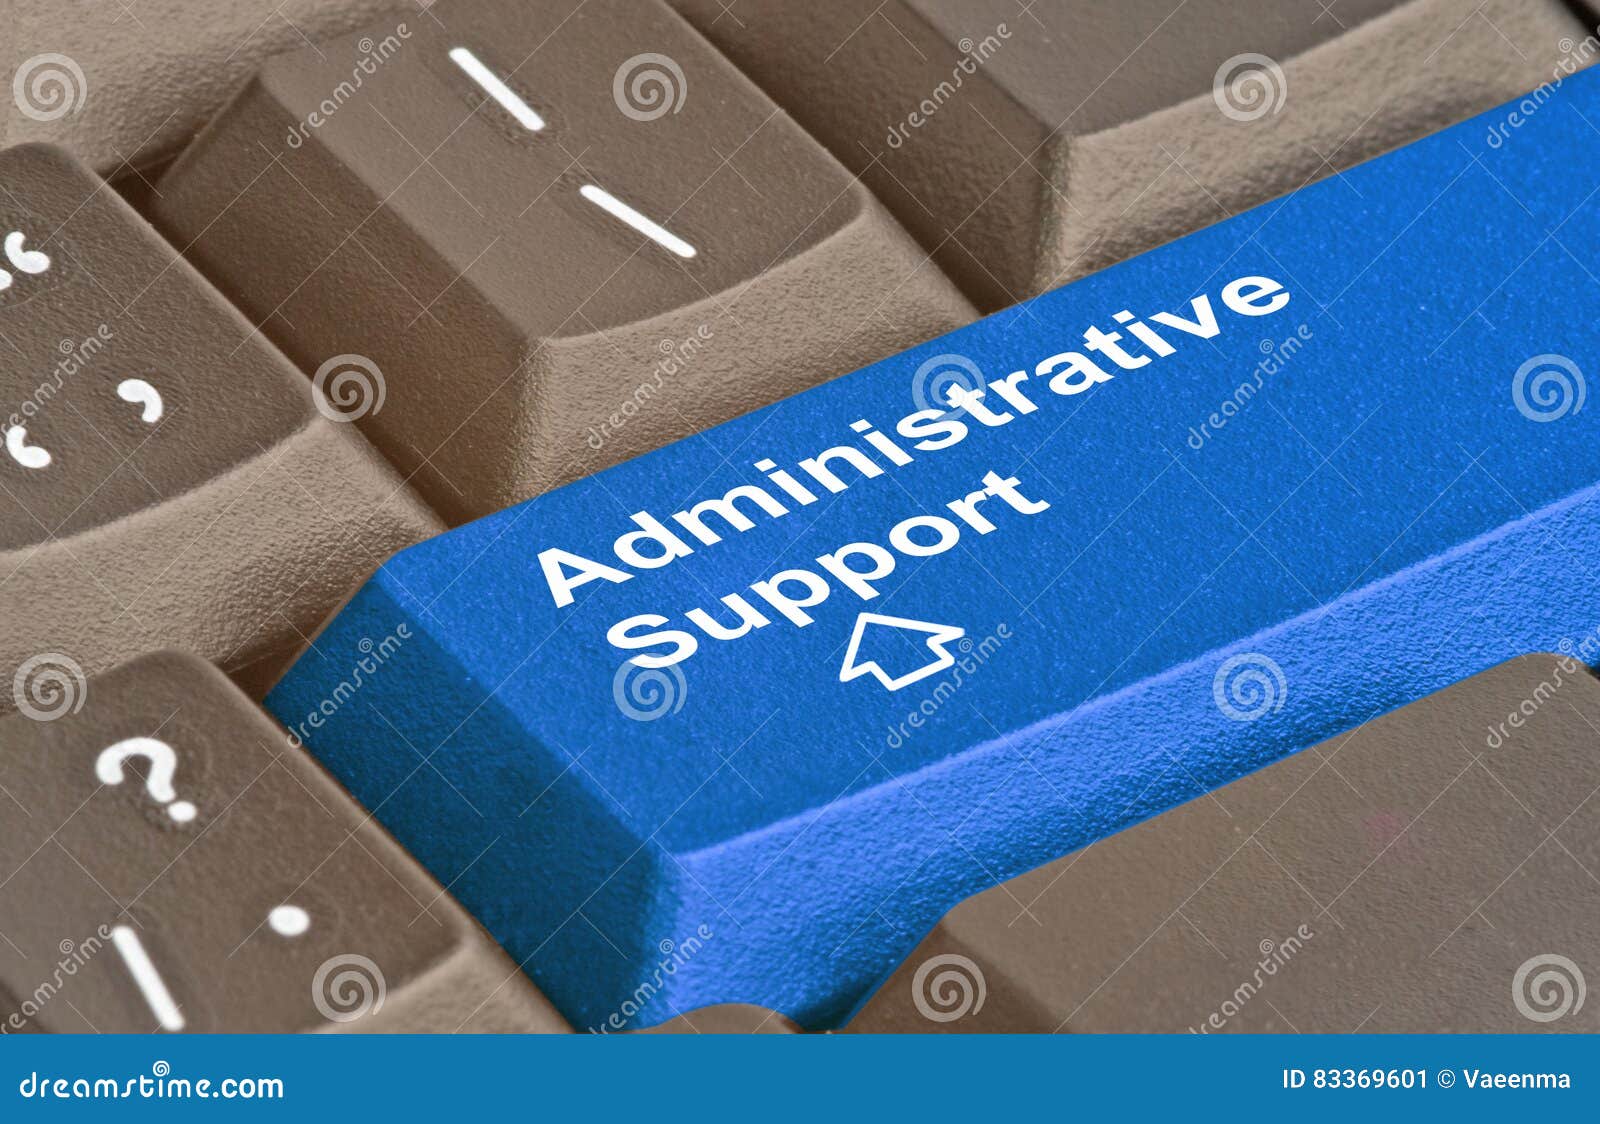 key for administrative support